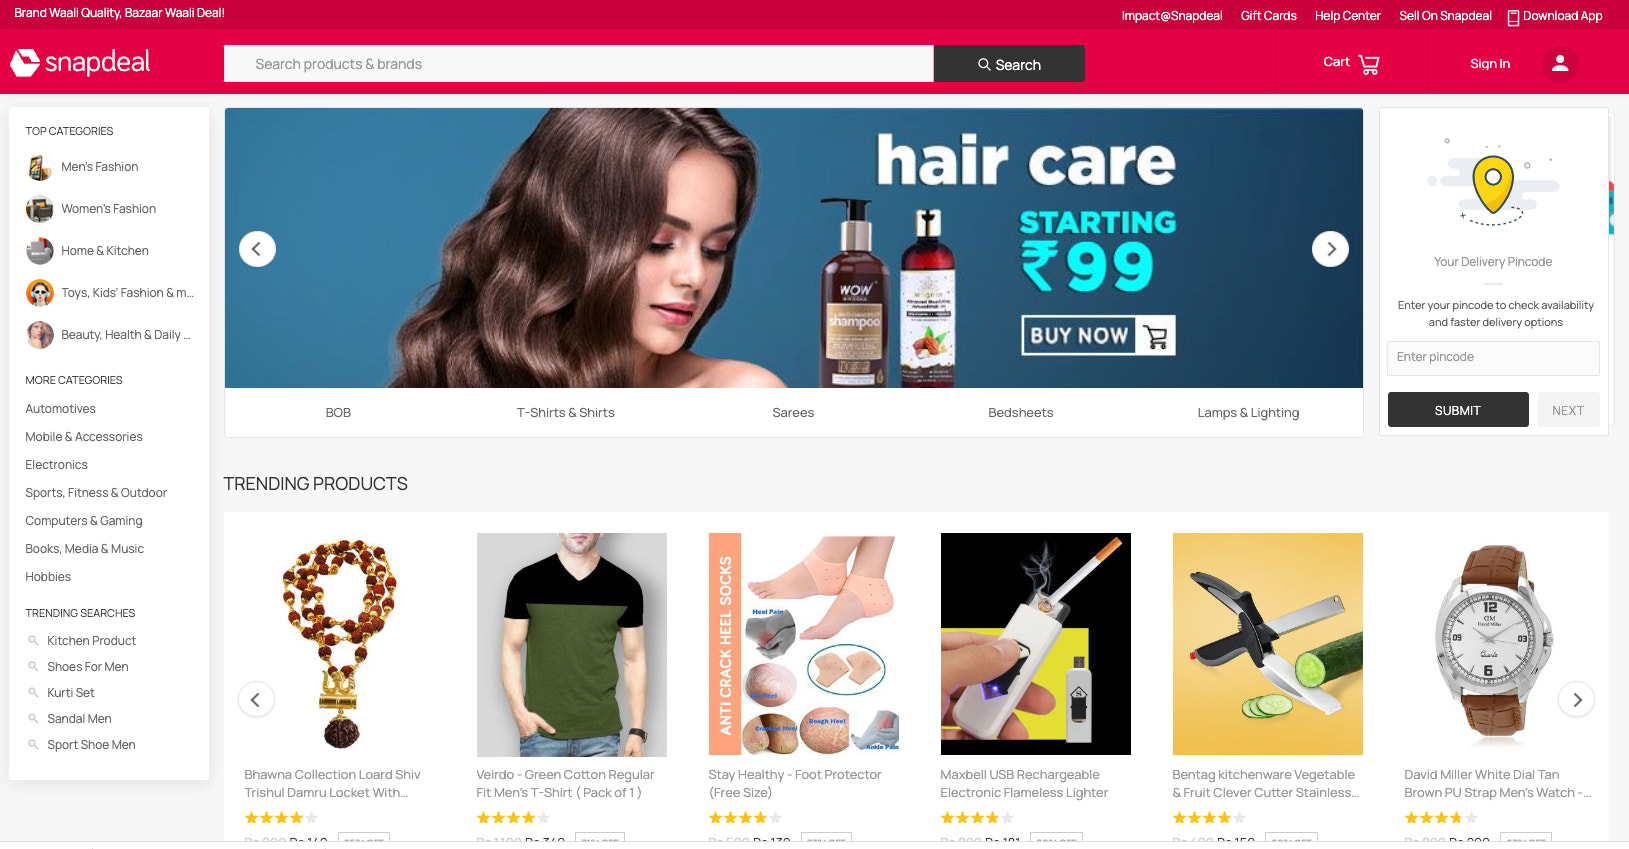 snapdeal home page